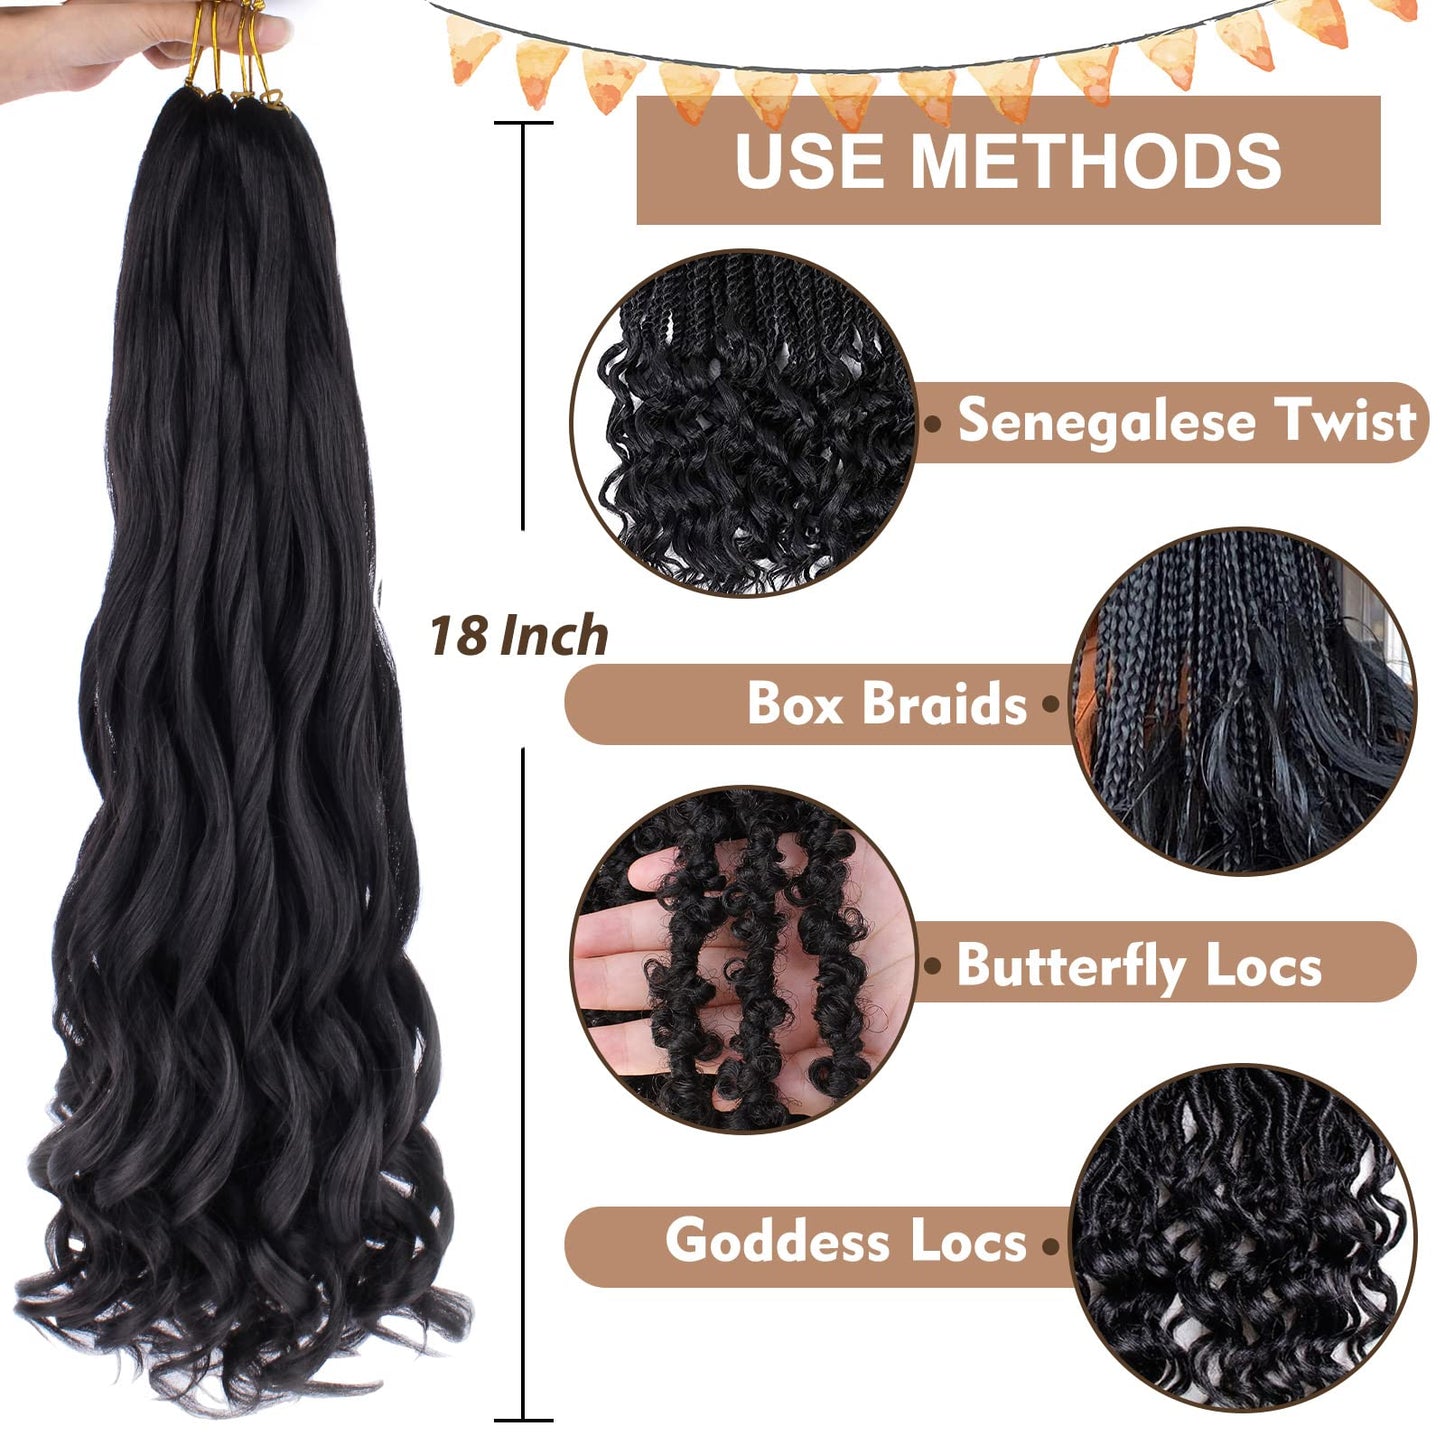 COOKOO 18 Inch 2 Packs Pre Stretched Ginger French Curl Braiding Hair Bouncy Loose Wave Braiding Hair Copper Red Spanish Curly Braids for Black Women Wave Crochet Synthetic Braids Hair Extentions 350#